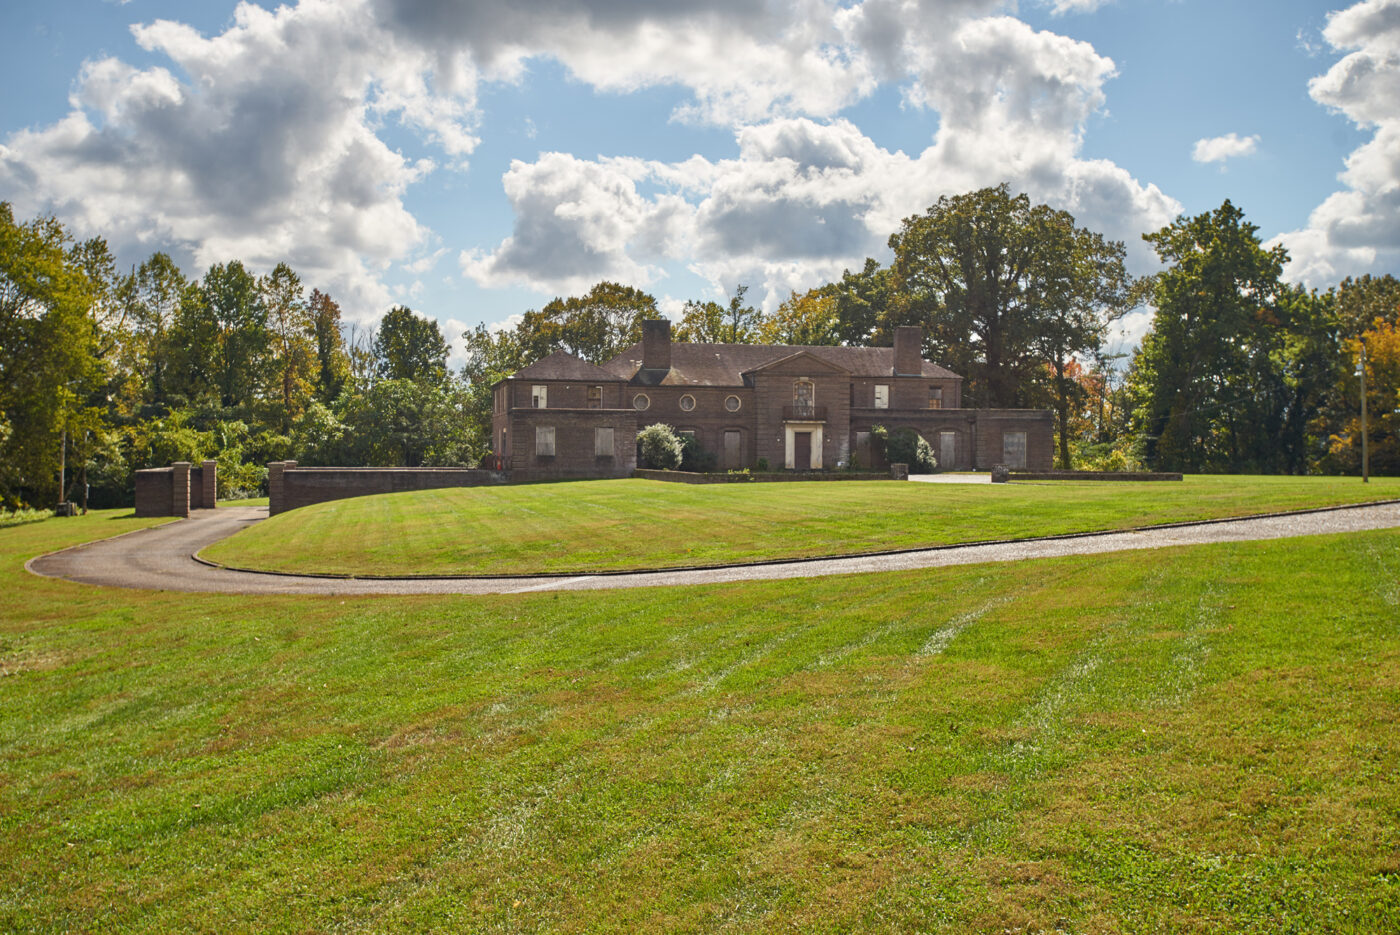 A large, brown brick house sits at the bottom of a grassy hill, with woods behind it and a blue sky full of cumulus clouds above.